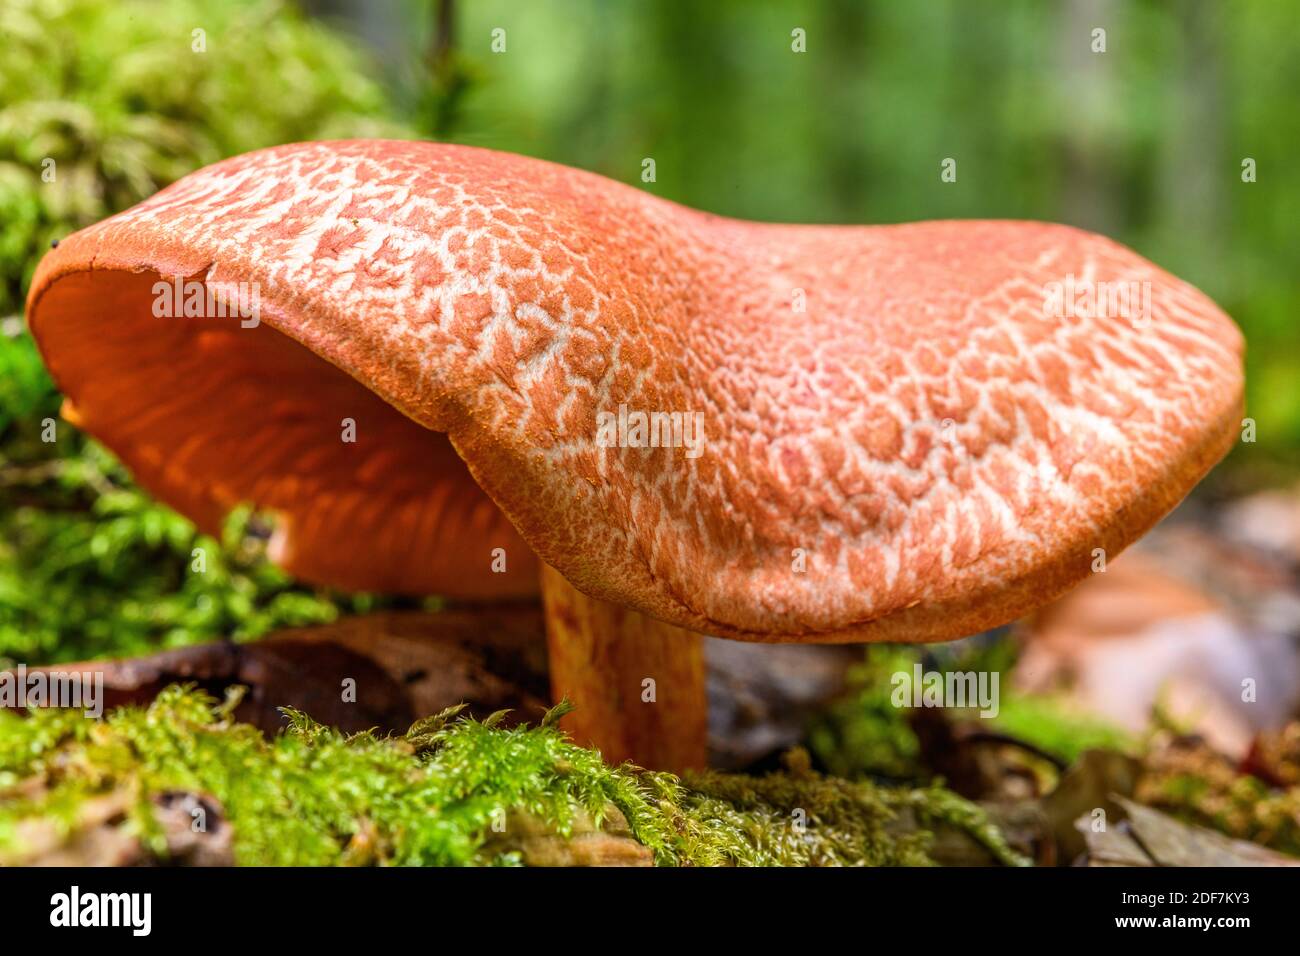 France, Somme (80), Cr?cy-en-Ponthieu, Cr?cy forest, Mushroom, Cortinarius bolaris Stock Photo